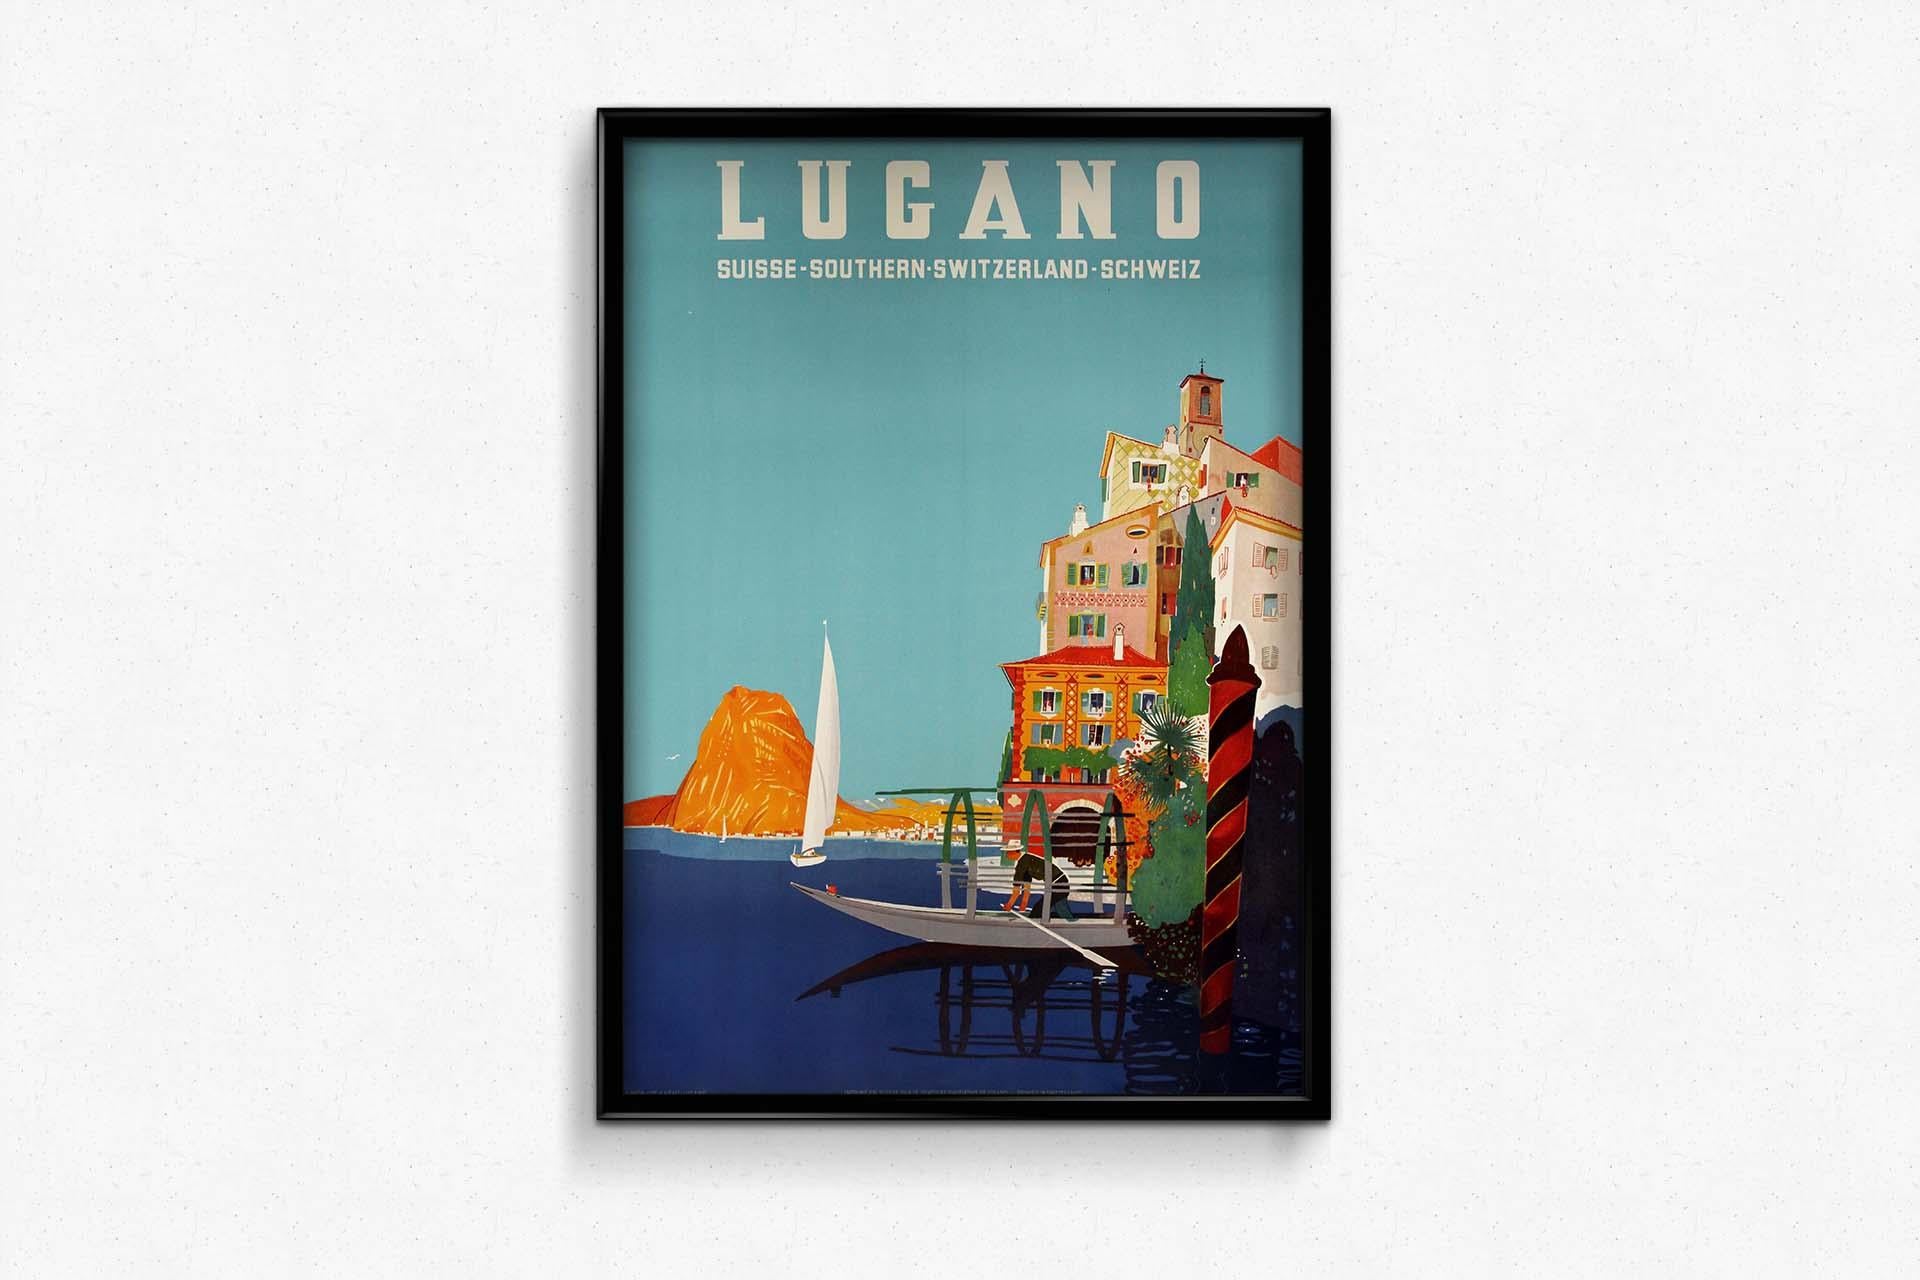 In the picturesque realm of travel posters, Daniele Buzzi's 1952 creation beckons viewers to explore the scenic wonders of Lugano in Southern Switzerland. This vintage masterpiece serves not only as an enticing promotional piece but also as a